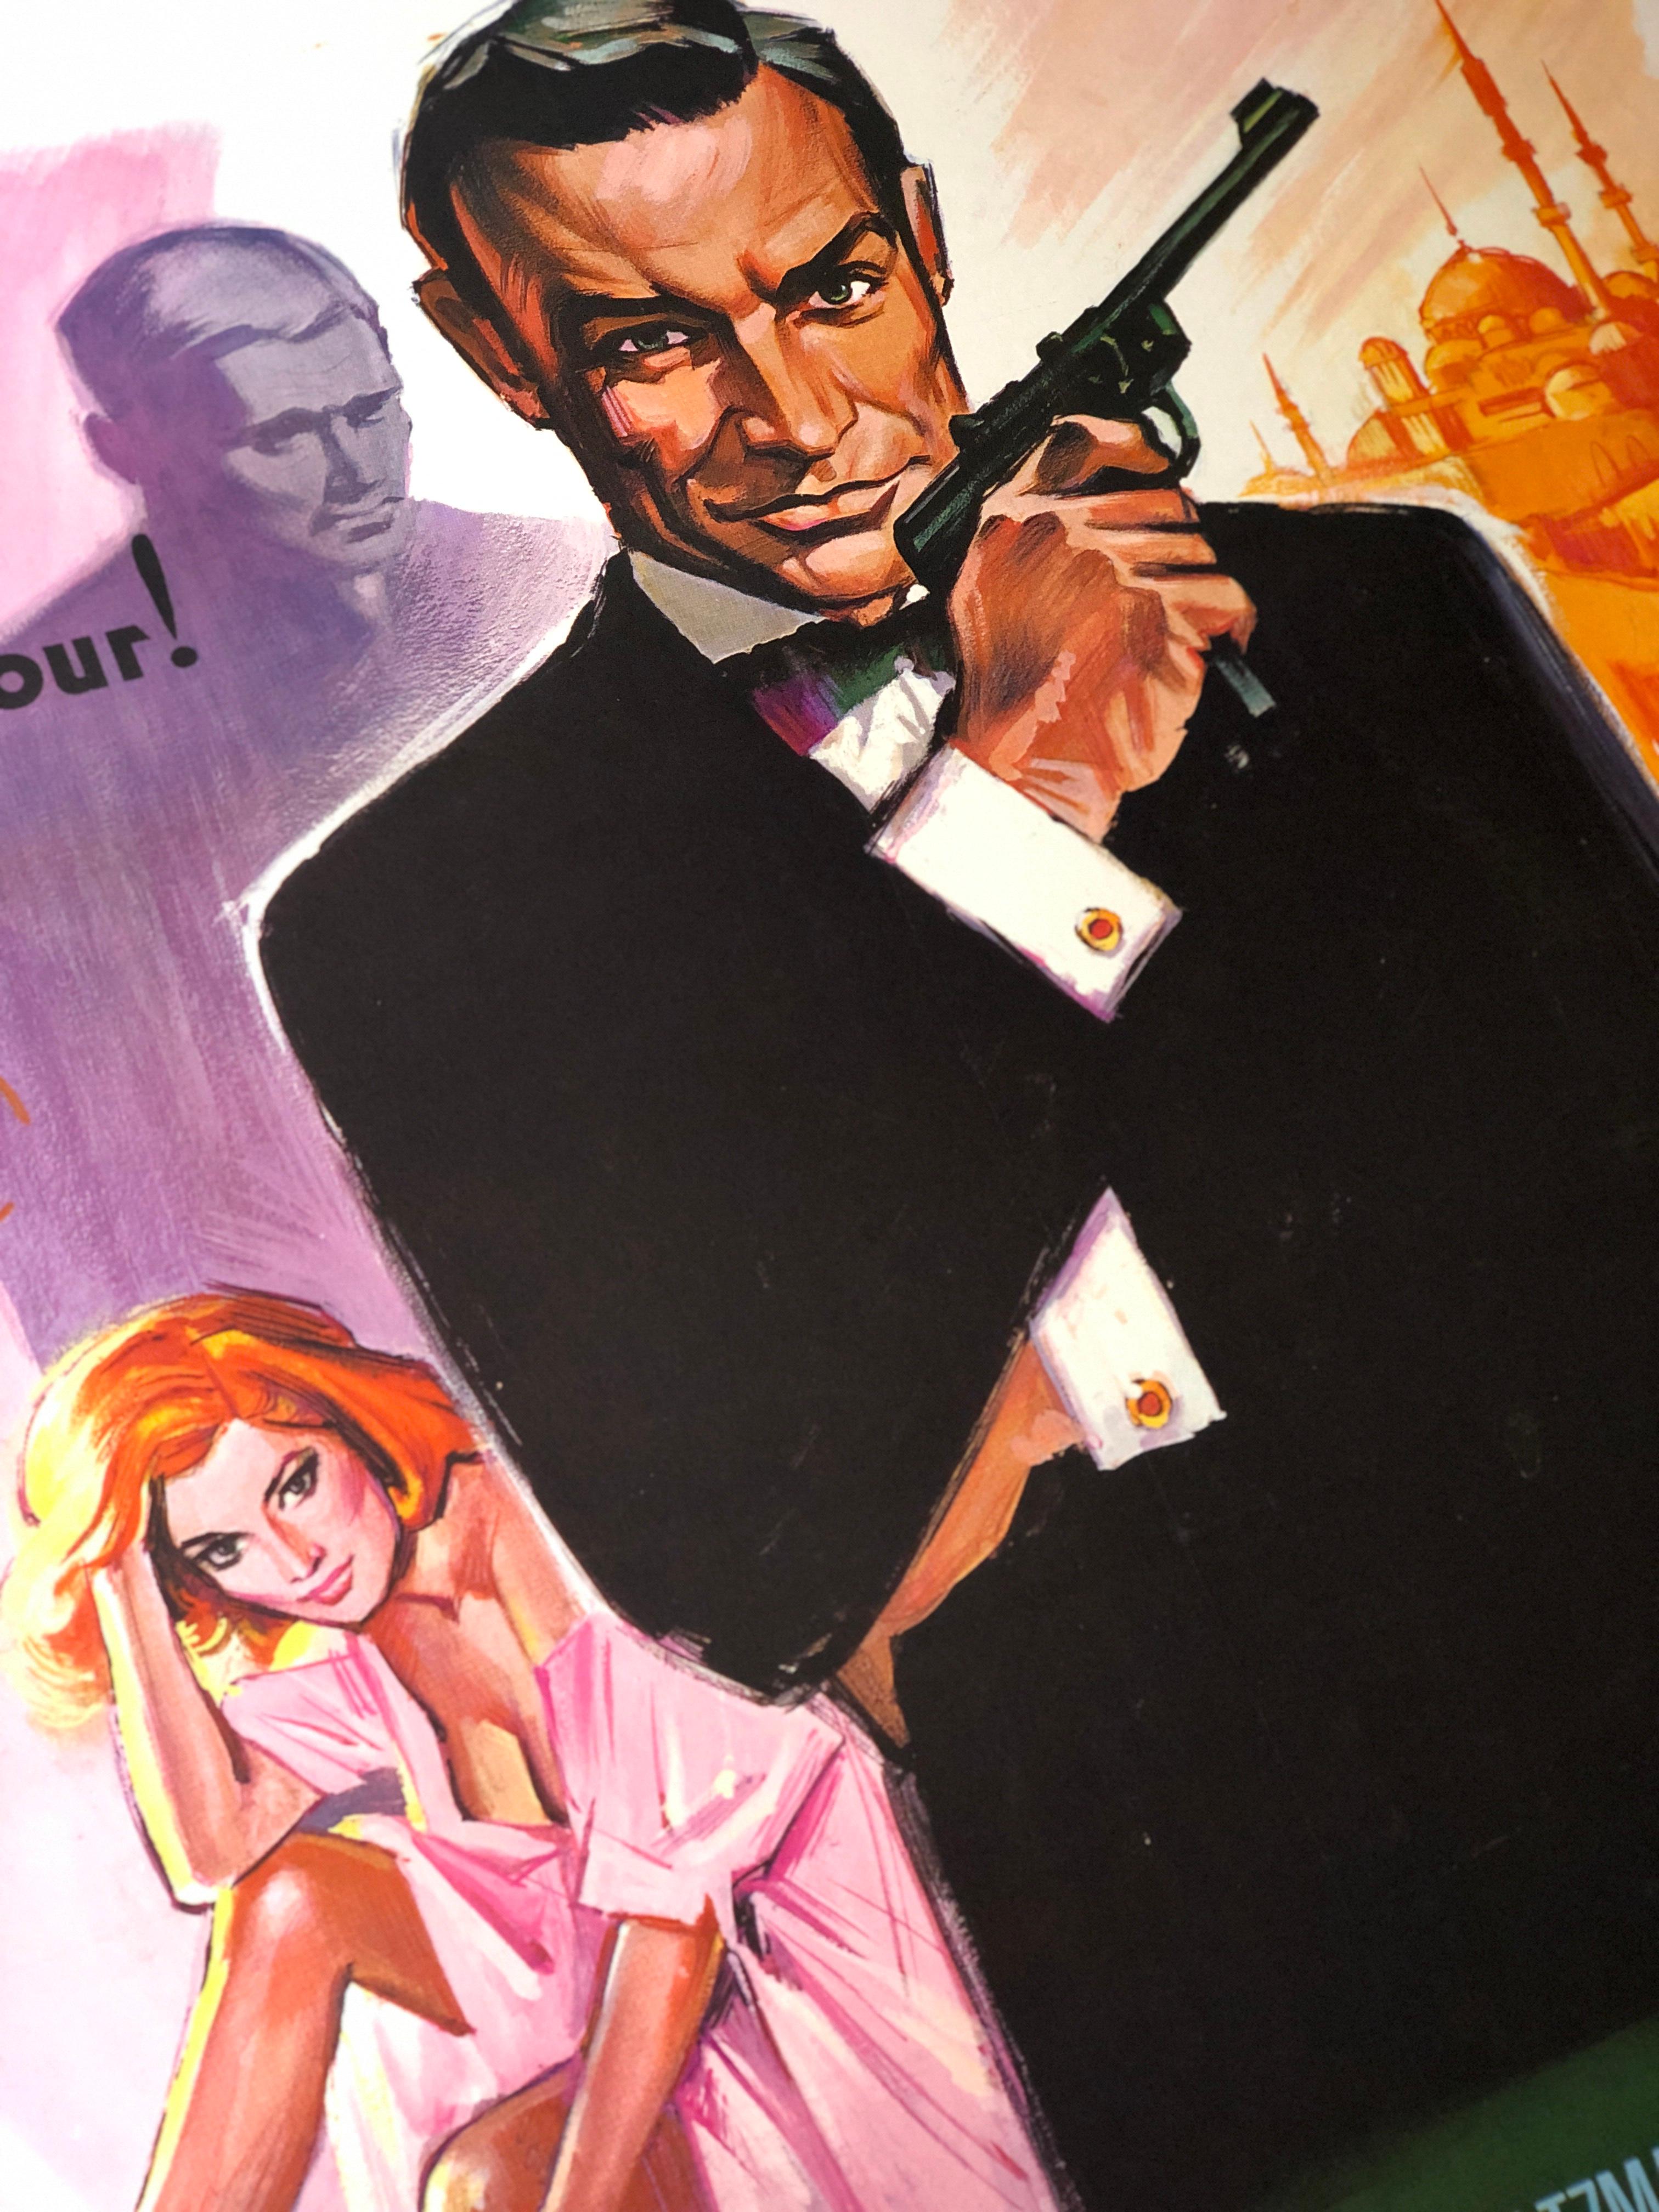 james bond from russia with love poster